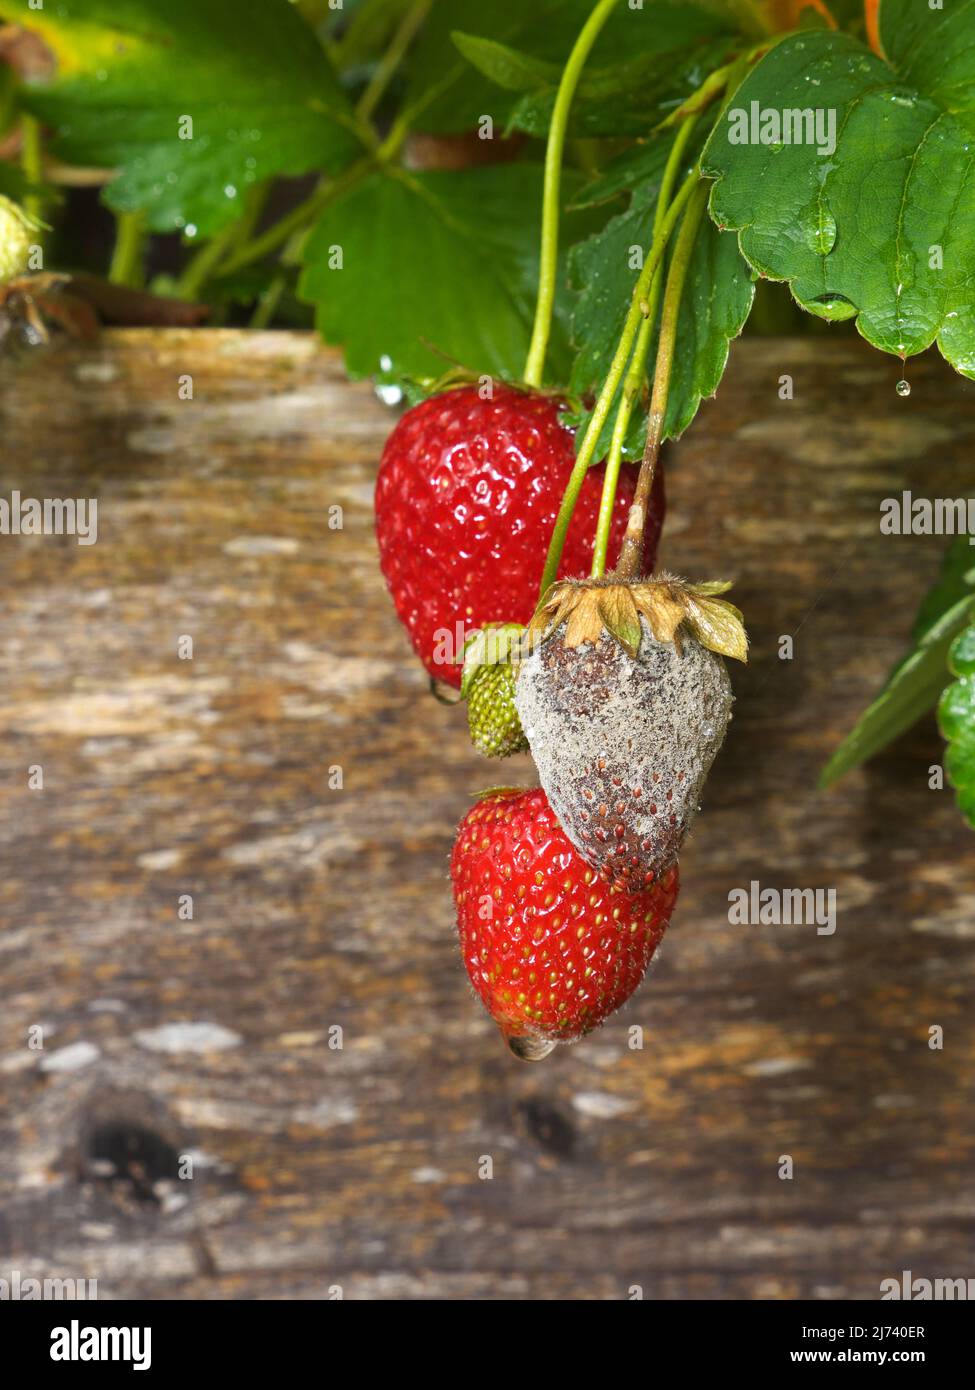 photo shows a close up of Botrytis Fruit Rot or Gray Mold of strawberries - upright format Stock Photo